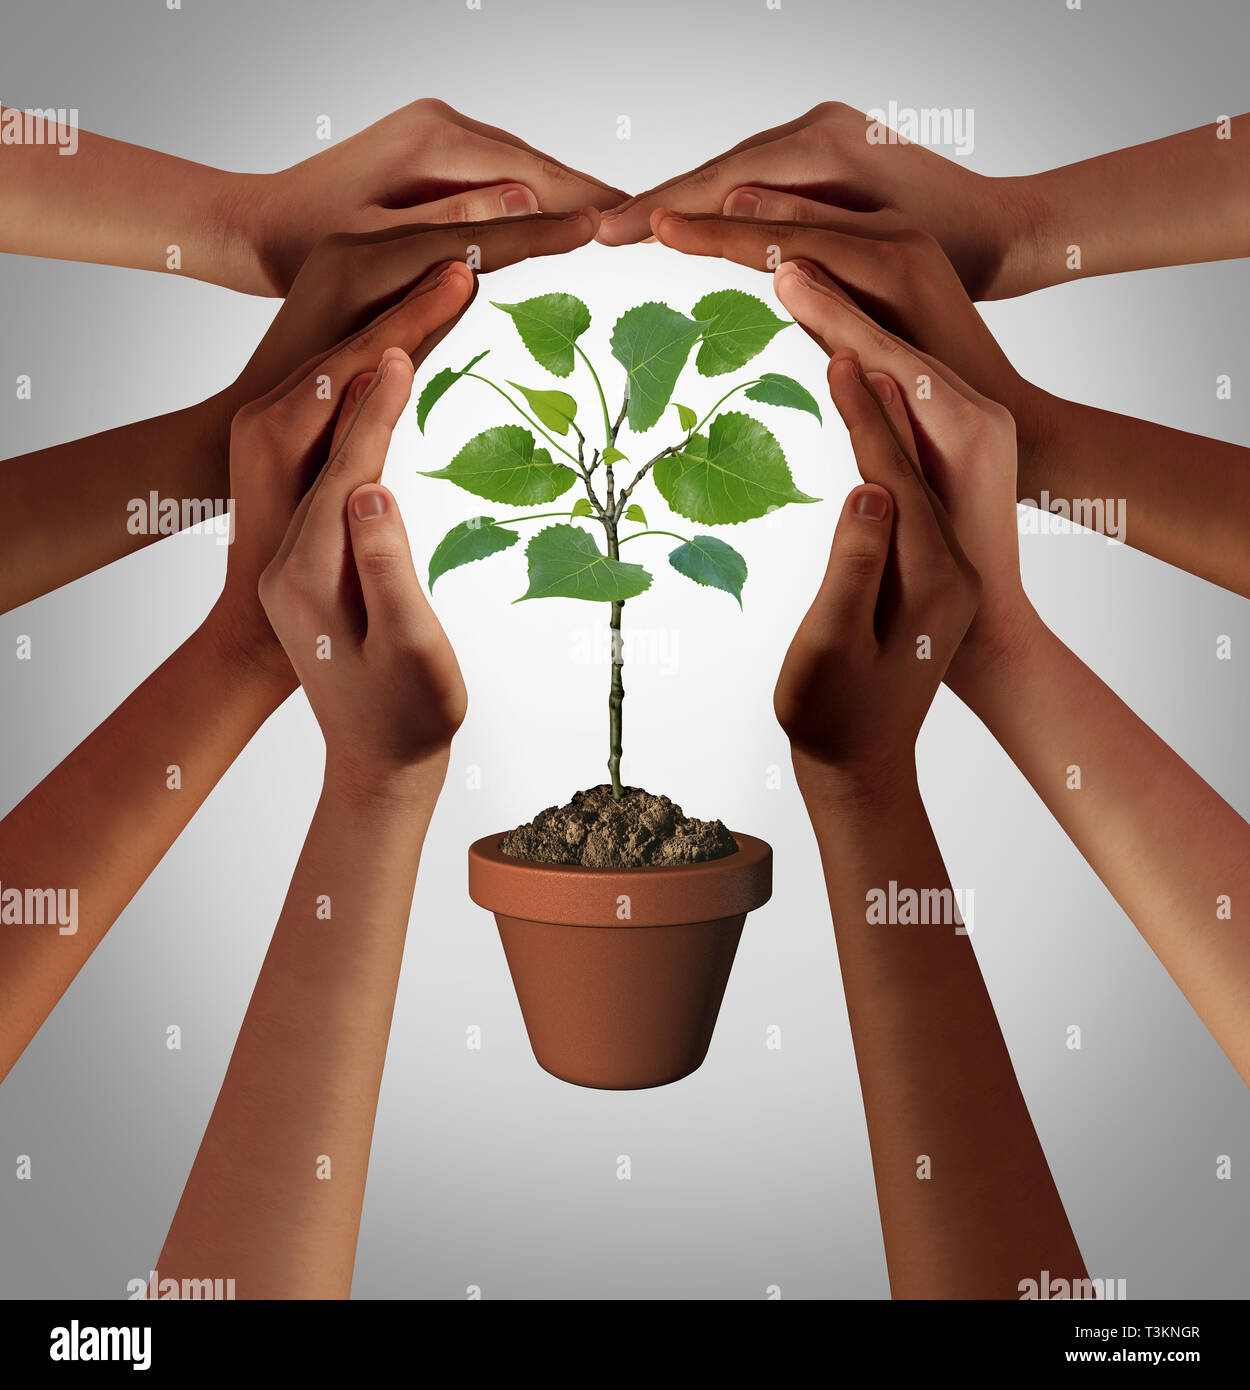 Diverse people caring together as a diverse group uniting and joining hands into the shape of an inspirational circle as a nurturing. Stock Photo